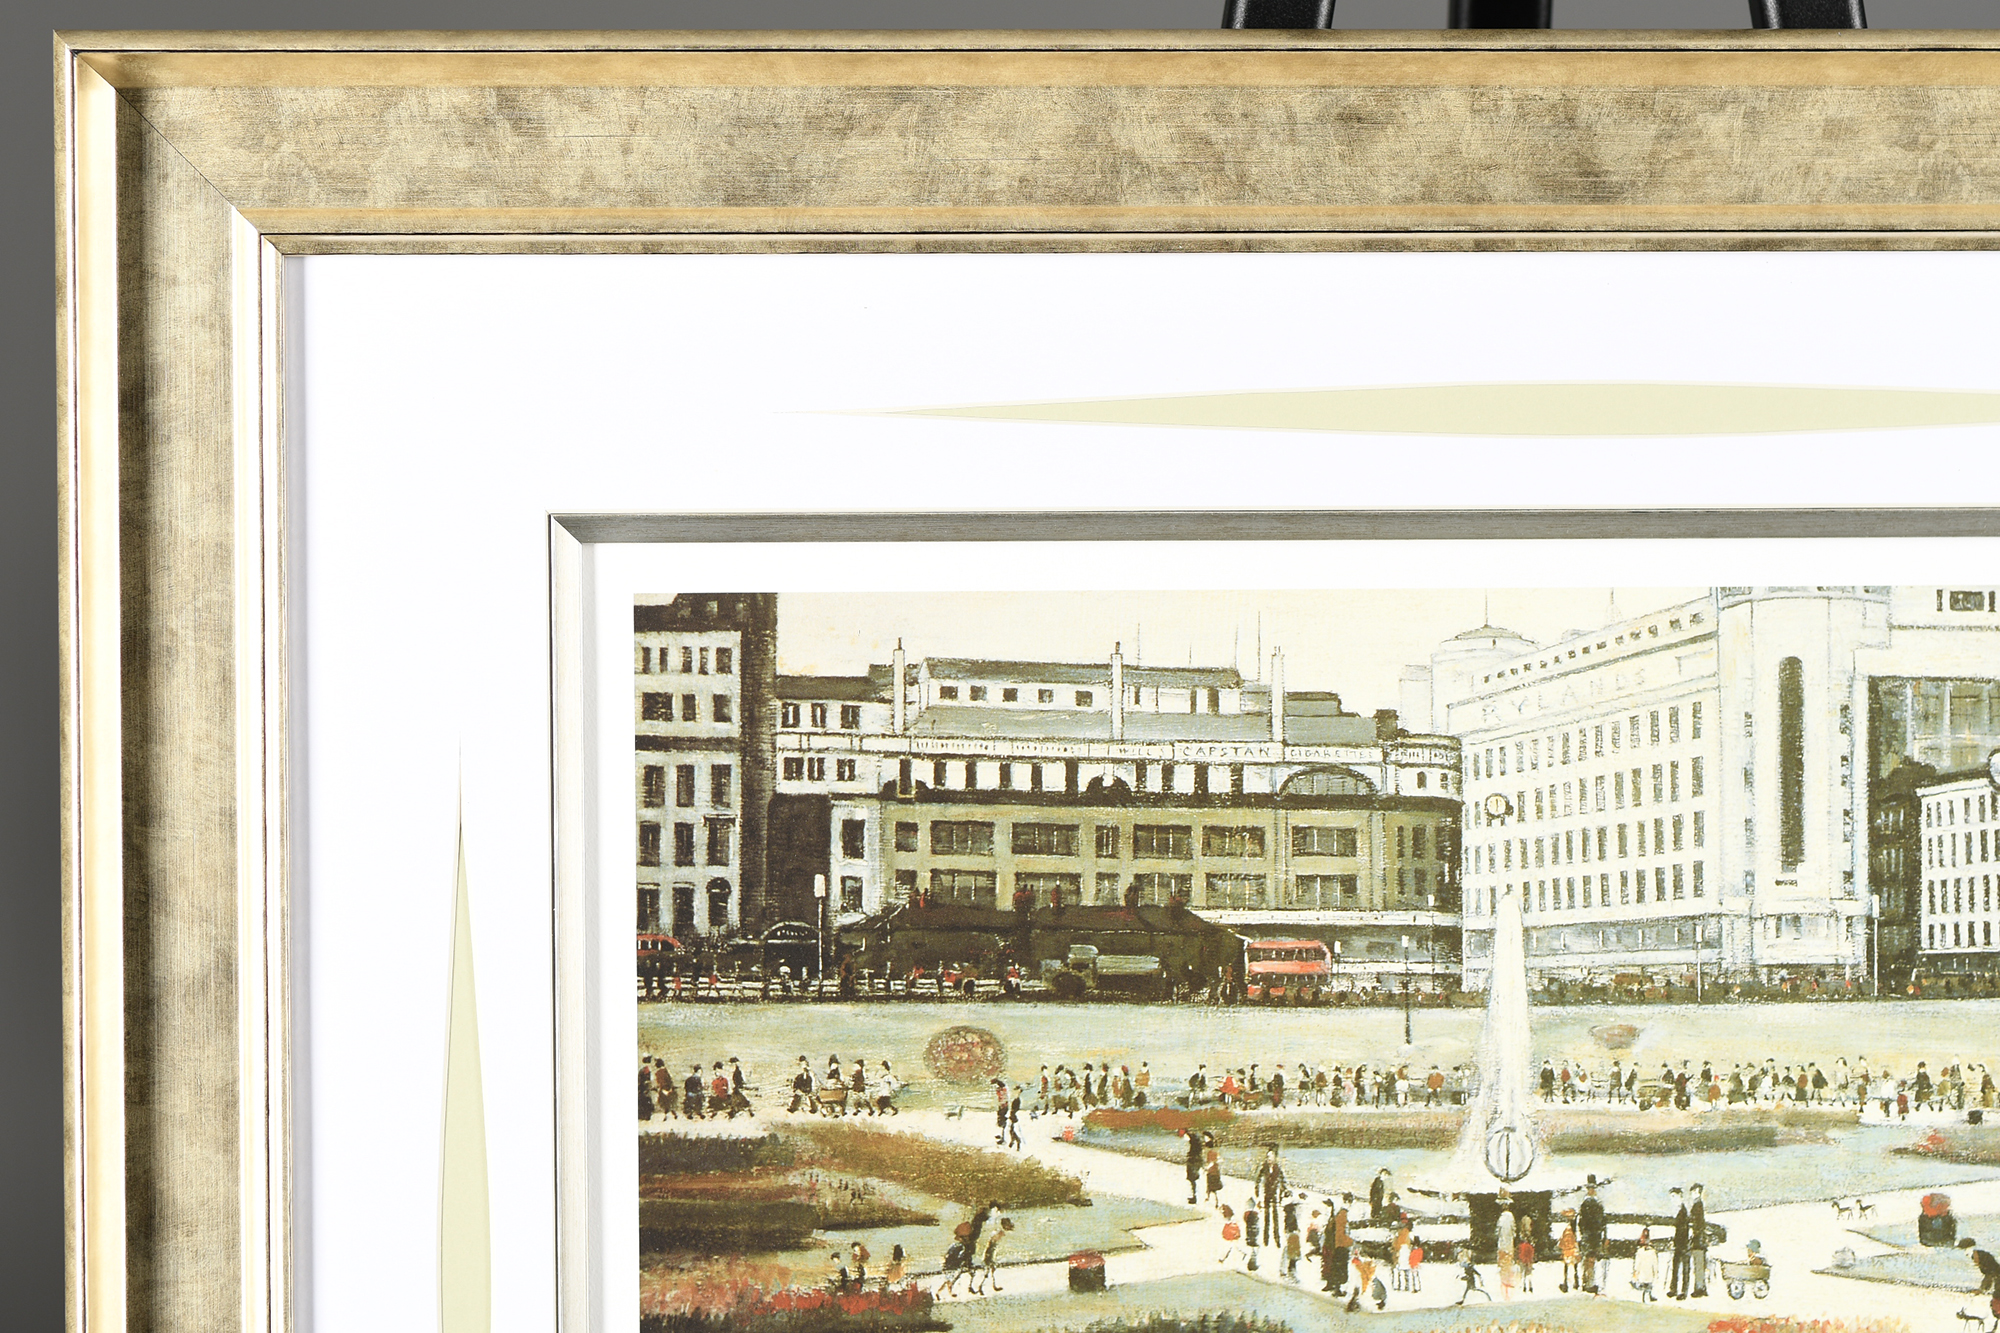 Limited Edition L.S. Lowry "Piccadilly Gardens" Authentication & Embossed Stamped. Mint Condition. - Image 8 of 10